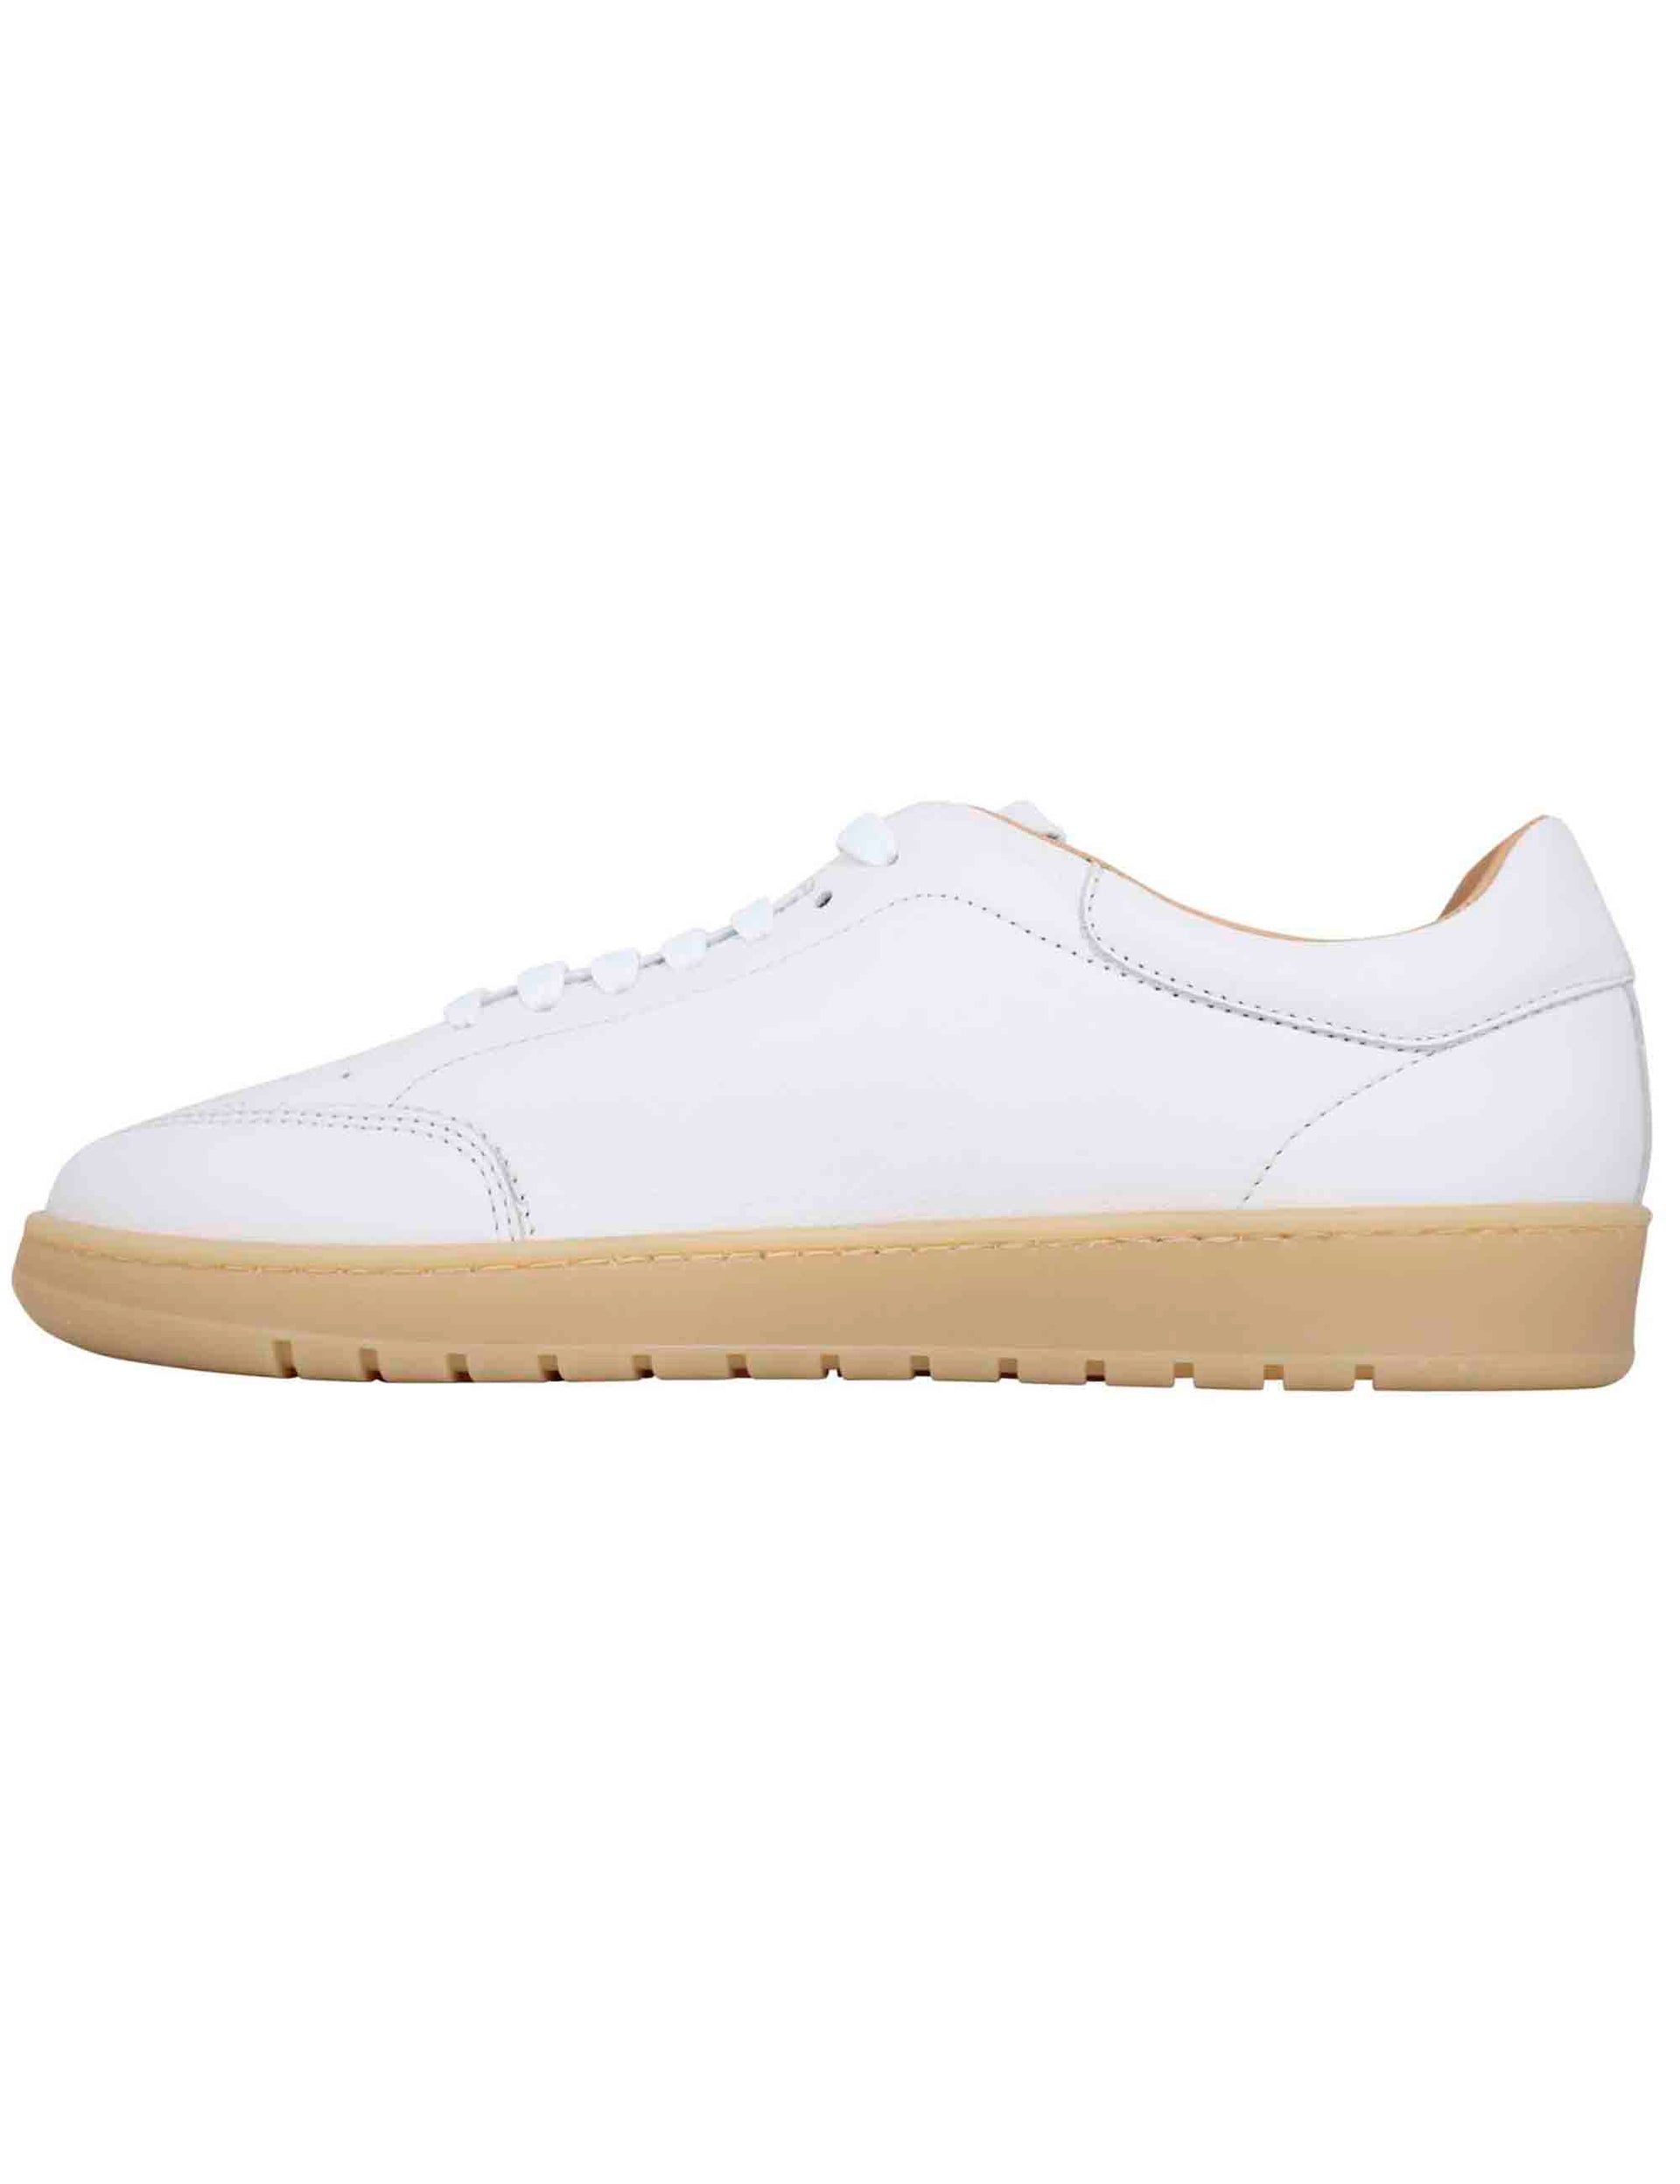 Men's white leather sneakers with amber rubber sole